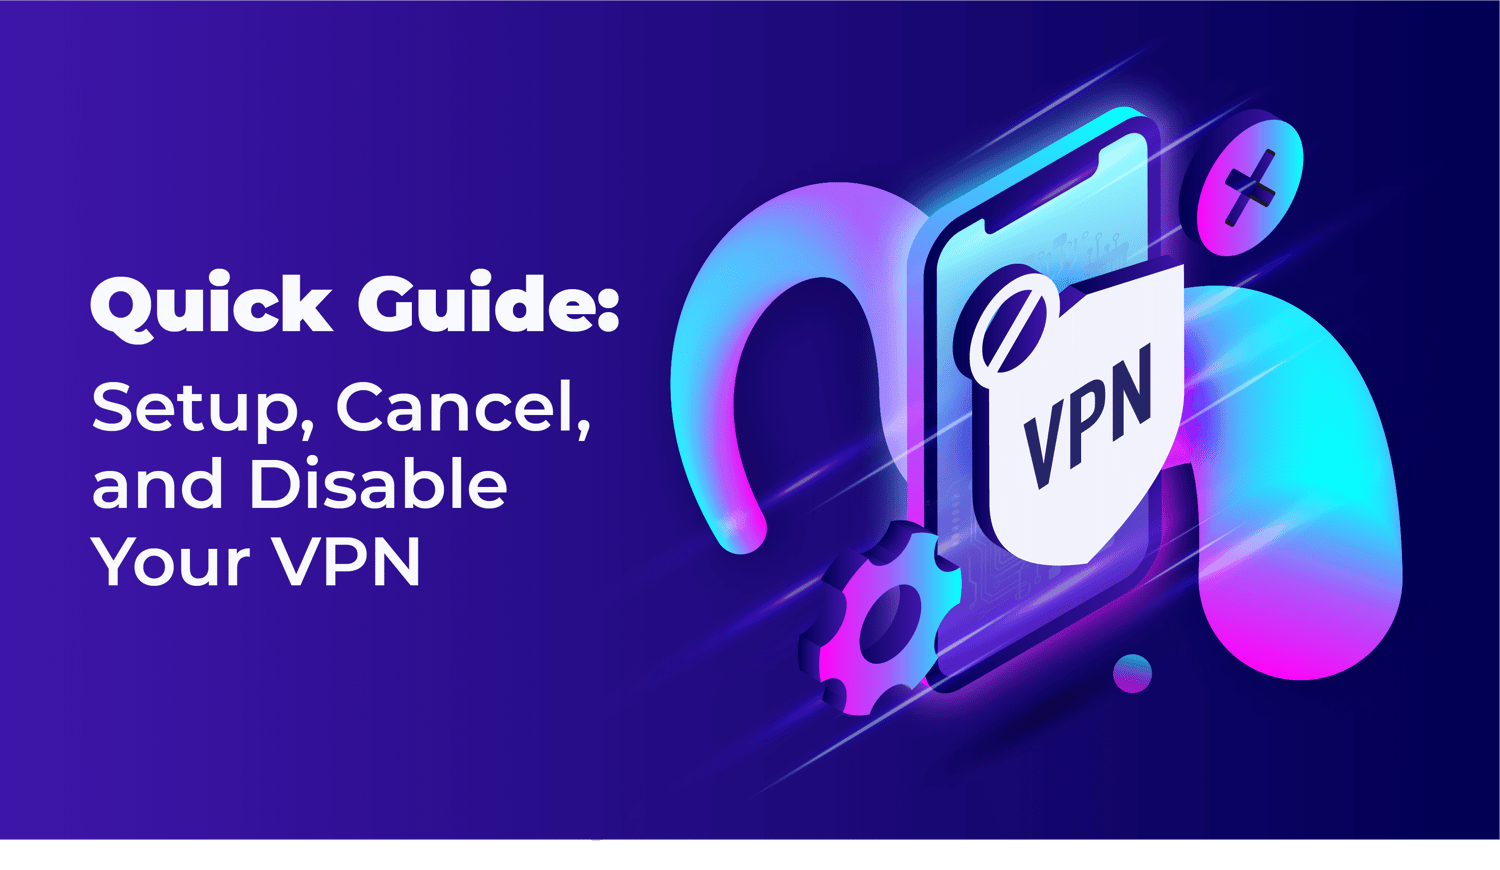 Quick Guide: Setup, Cancel, and Disable Your VPN